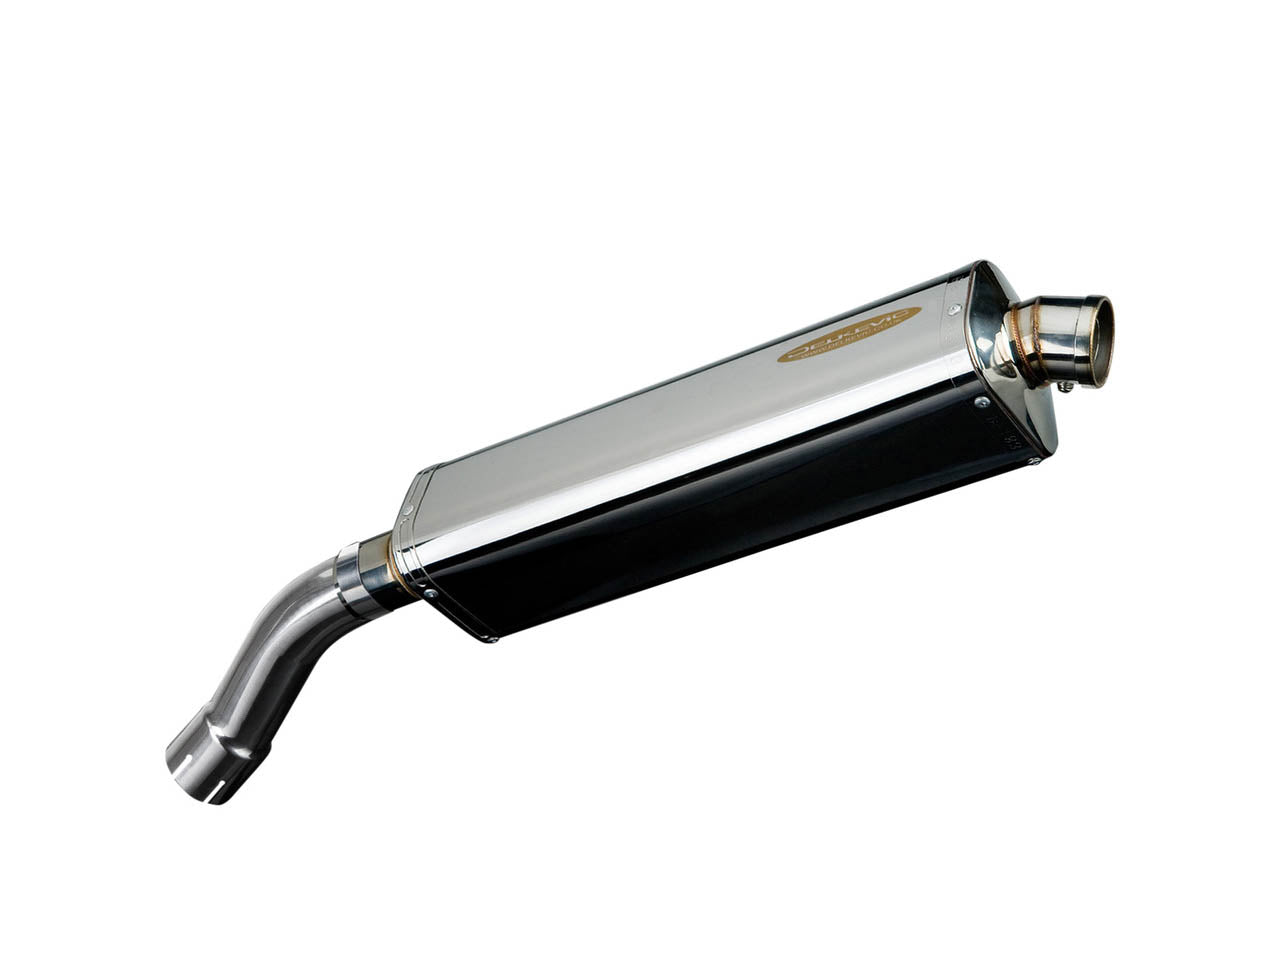 DELKEVIC BMW F800R (09/16) Slip-on Exhaust Stubby 17" Tri-Oval